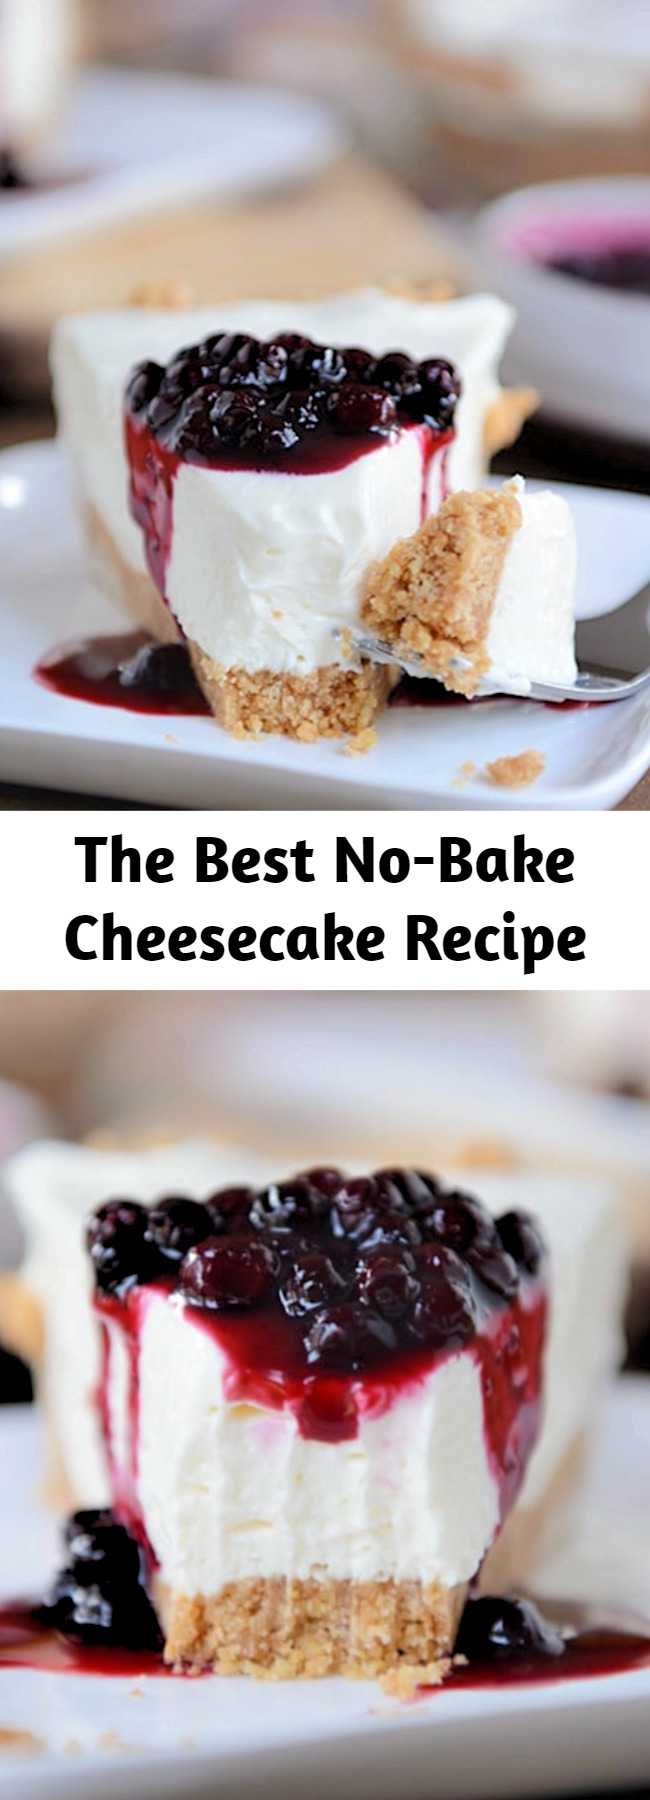 Looking for the best no-bake cheesecake? Rich and creamy and so simple to prepare, this classic no-bake vanilla cheesecake is the stuff dreams are made of.